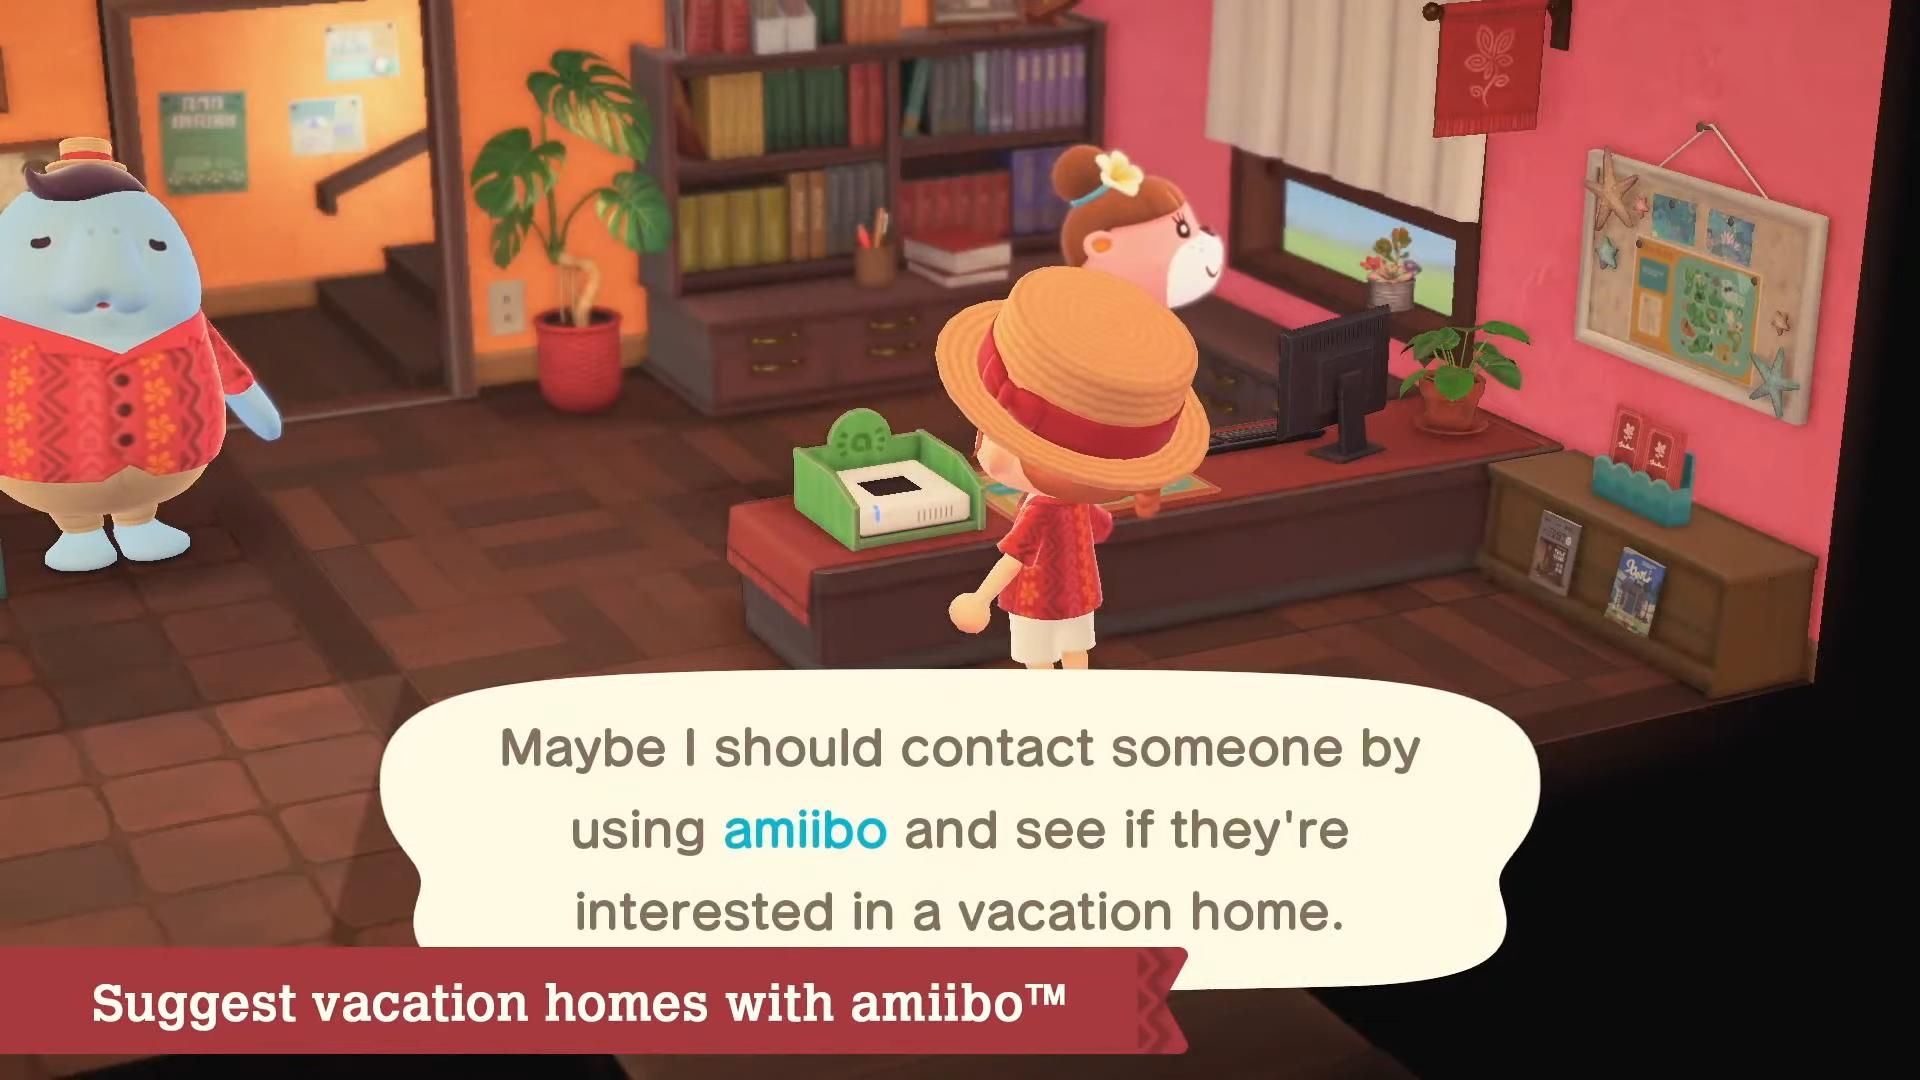 Animal Crossing: New Horizons DLC - How to access Happy Home